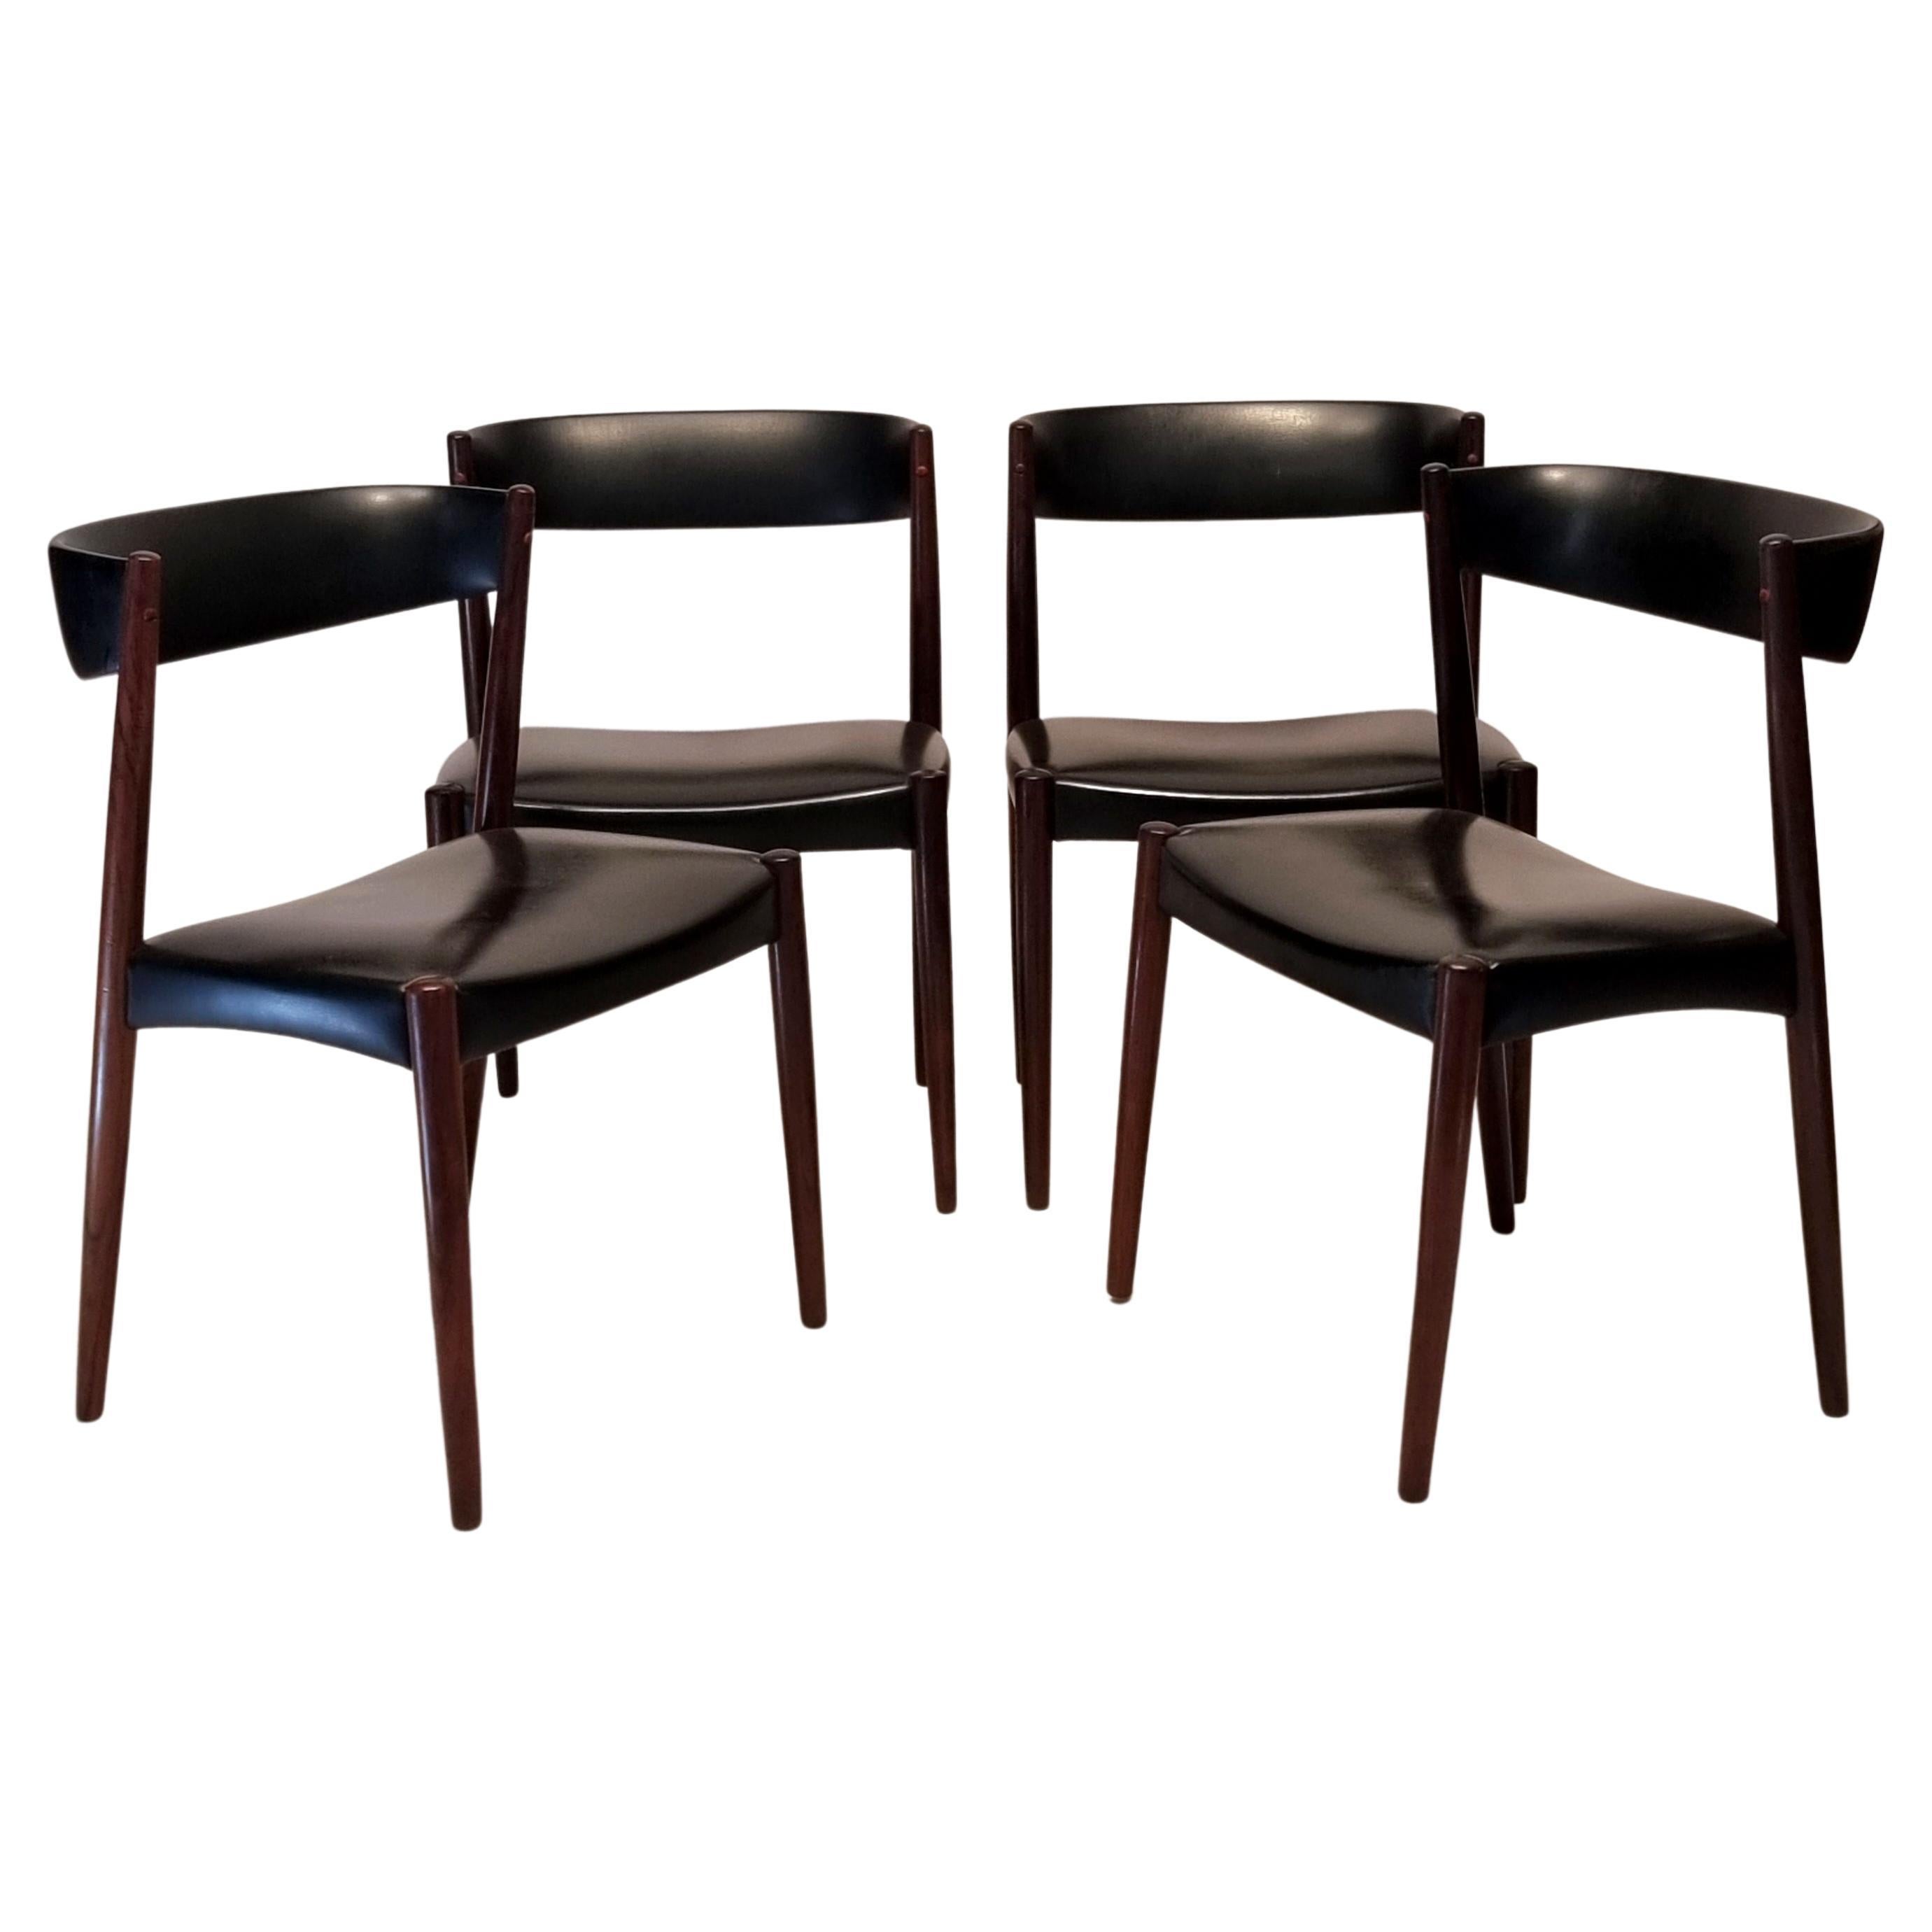 Series Of Four Scandinavian Chairs - Vejle Mobelfabrik - Rosewood - Ca 1960 For Sale